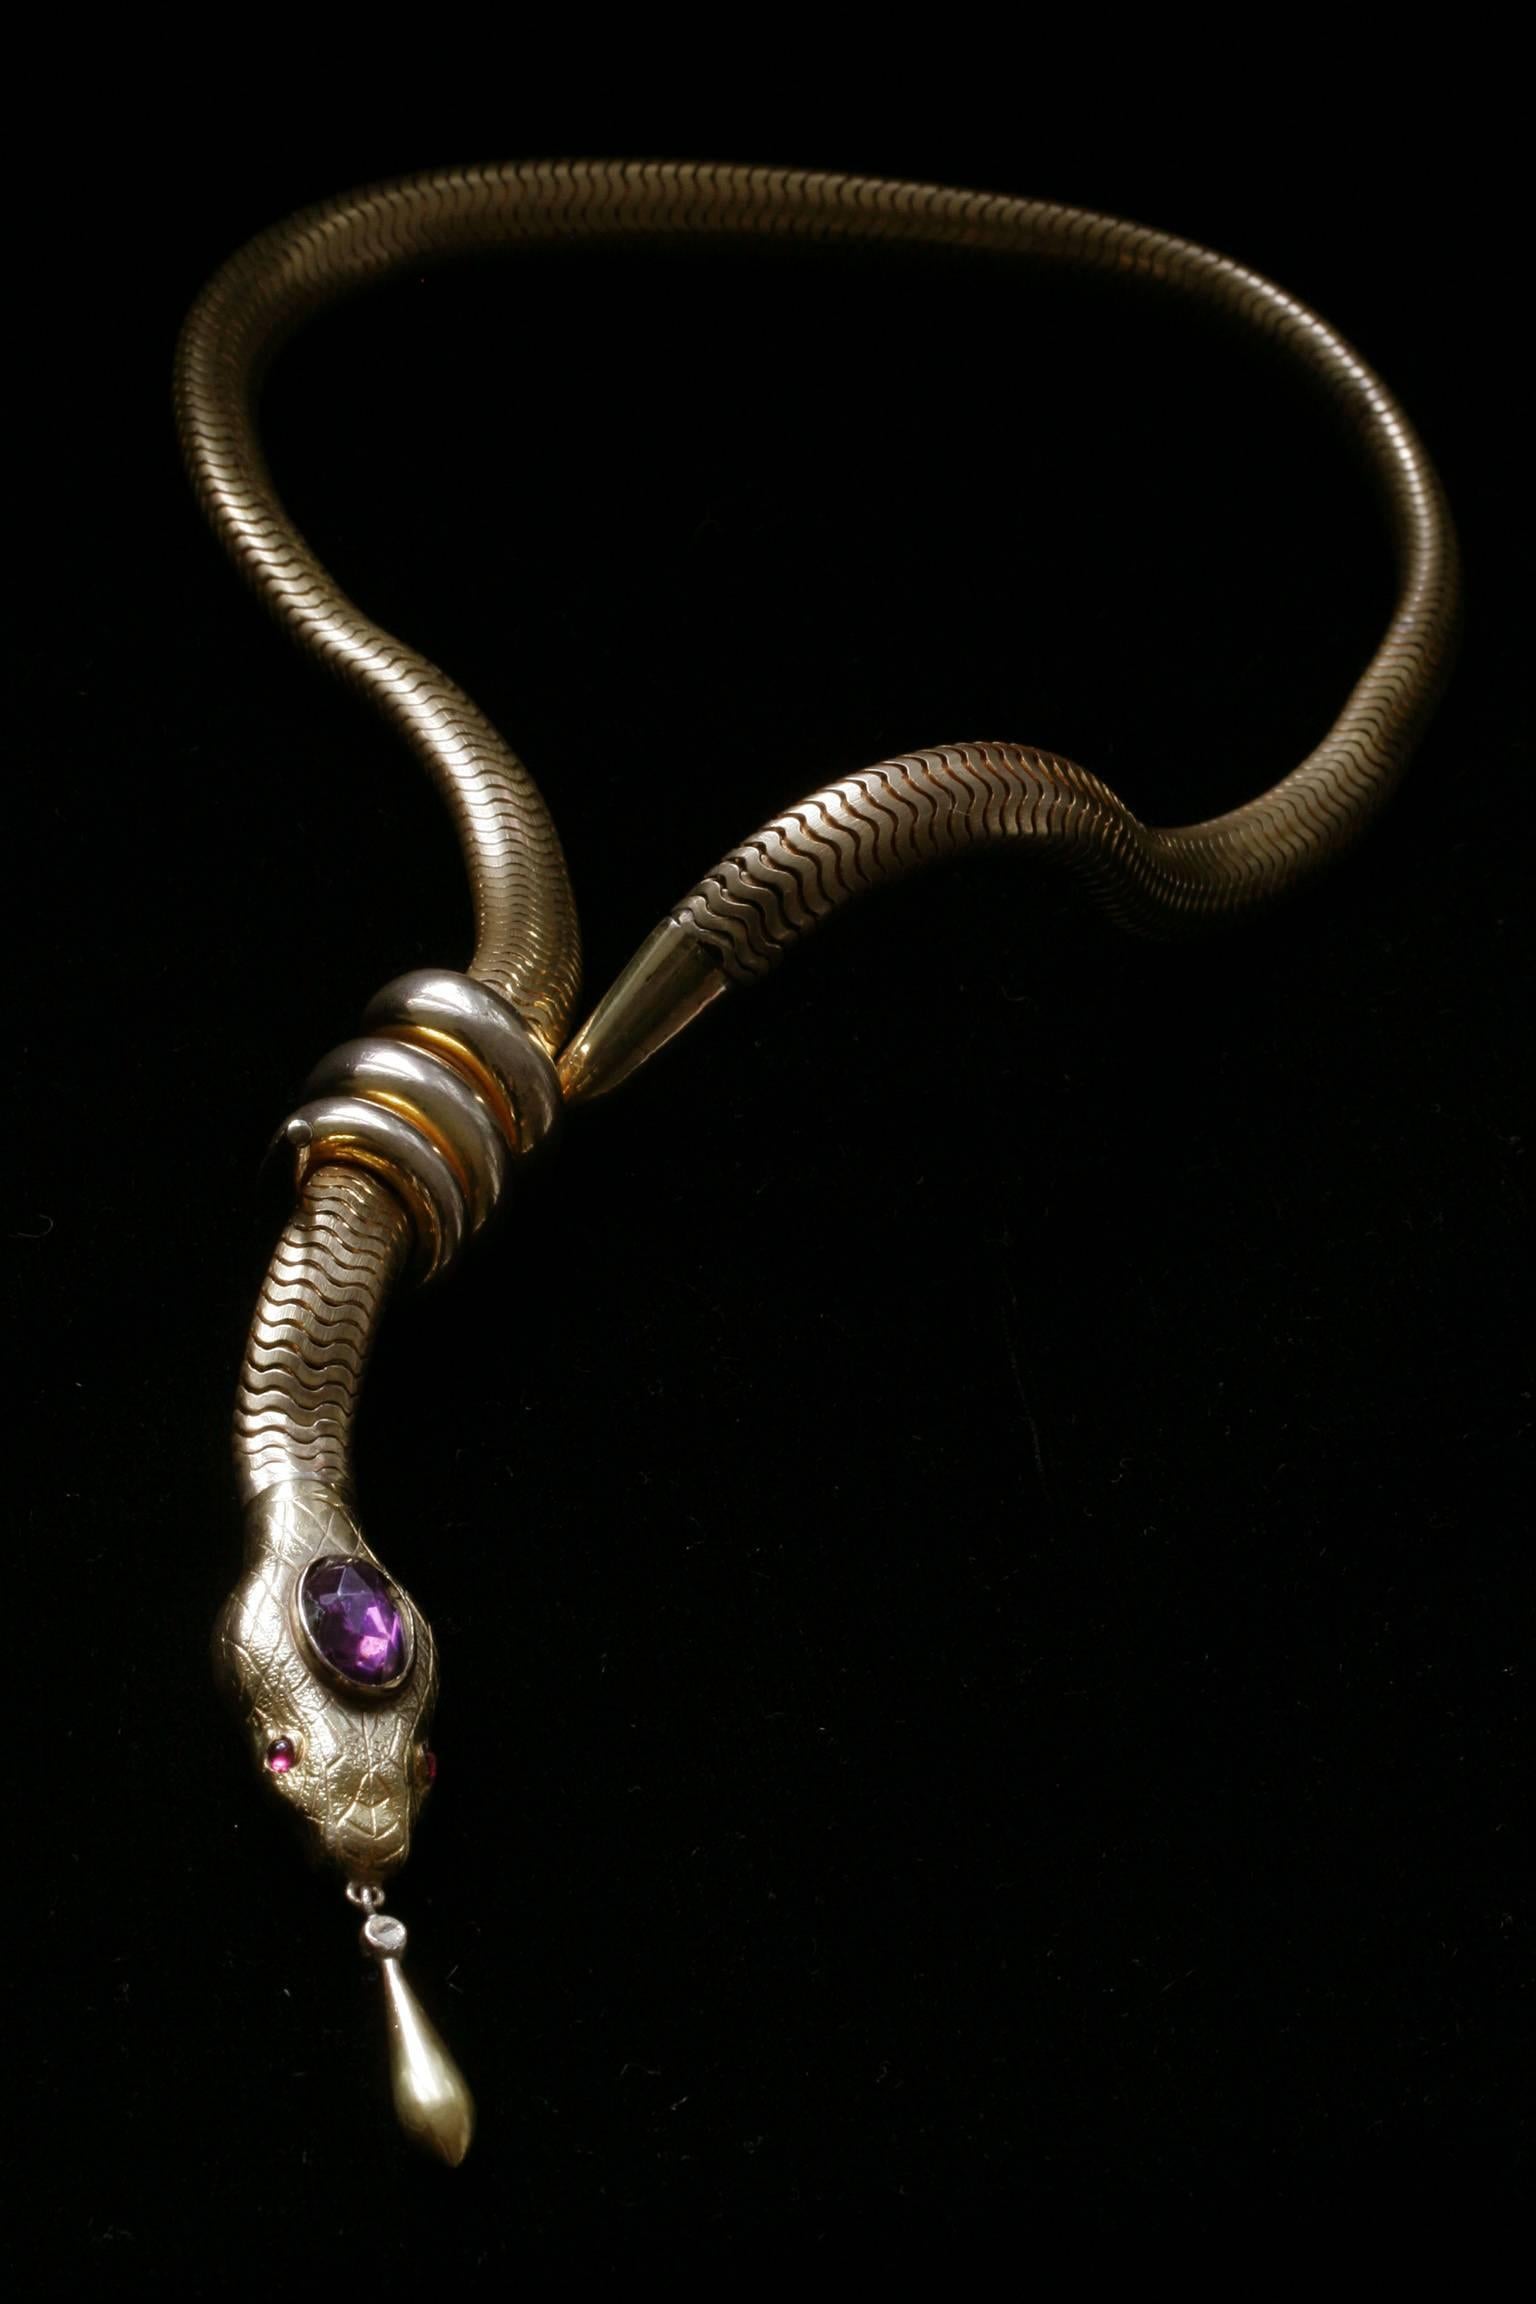 A strikingly constructed mid Victorian gold-filled serpent necklace. The textured serpent’s flexible body/chain goes through the triple-coiled tail, and the head/pendant screws into the chain. The handsome snake’s head has garnet paste eyes and a